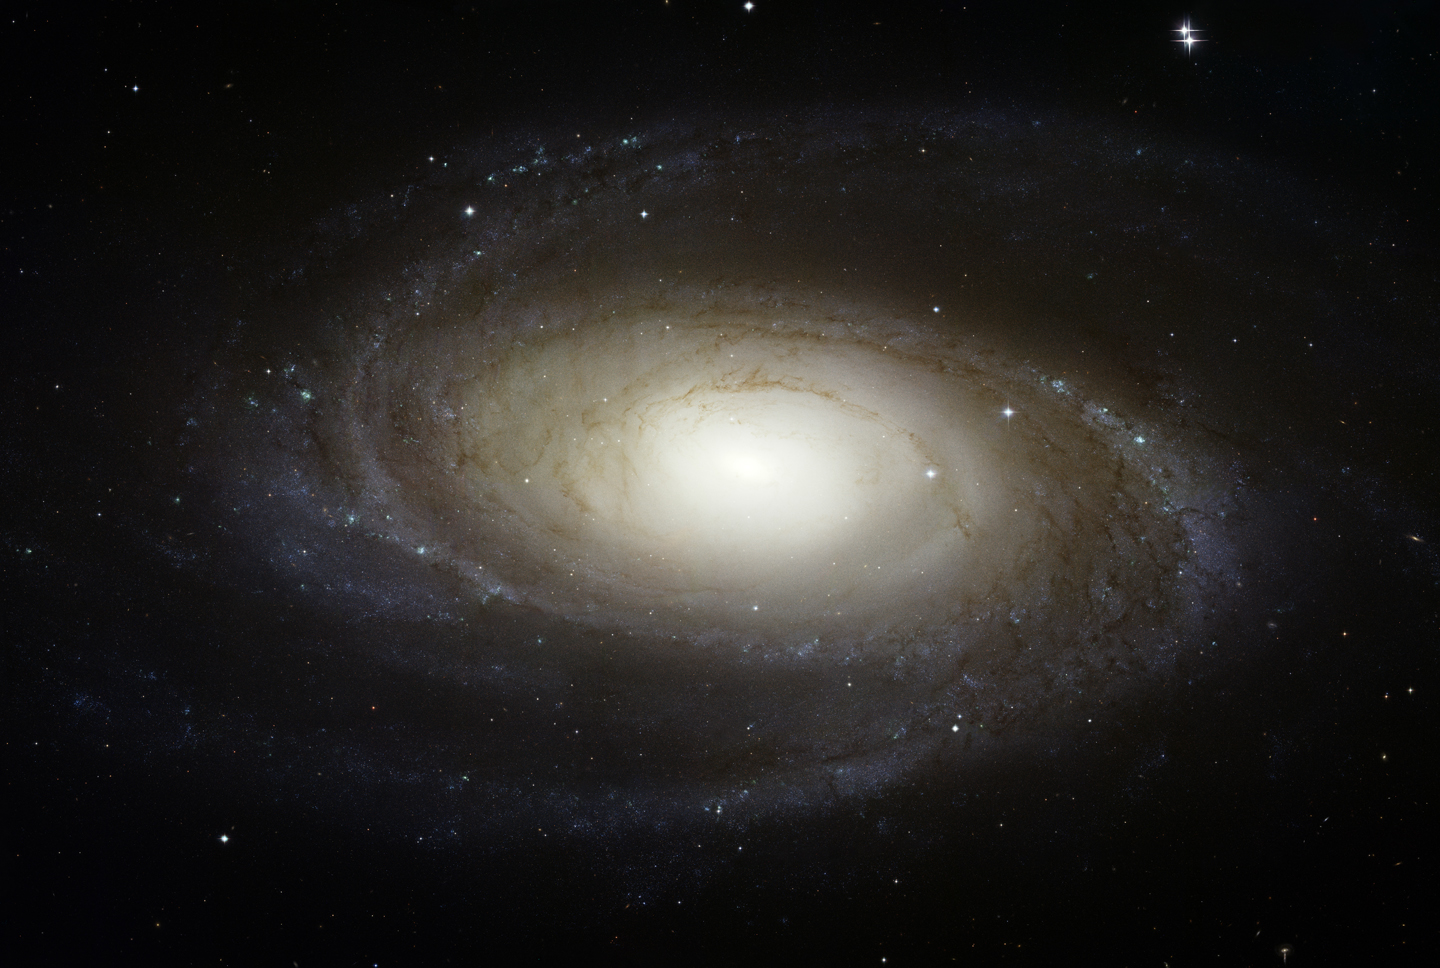 APOD: 2007 May 29 - Bright Spiral Galaxy M81 from Hubble